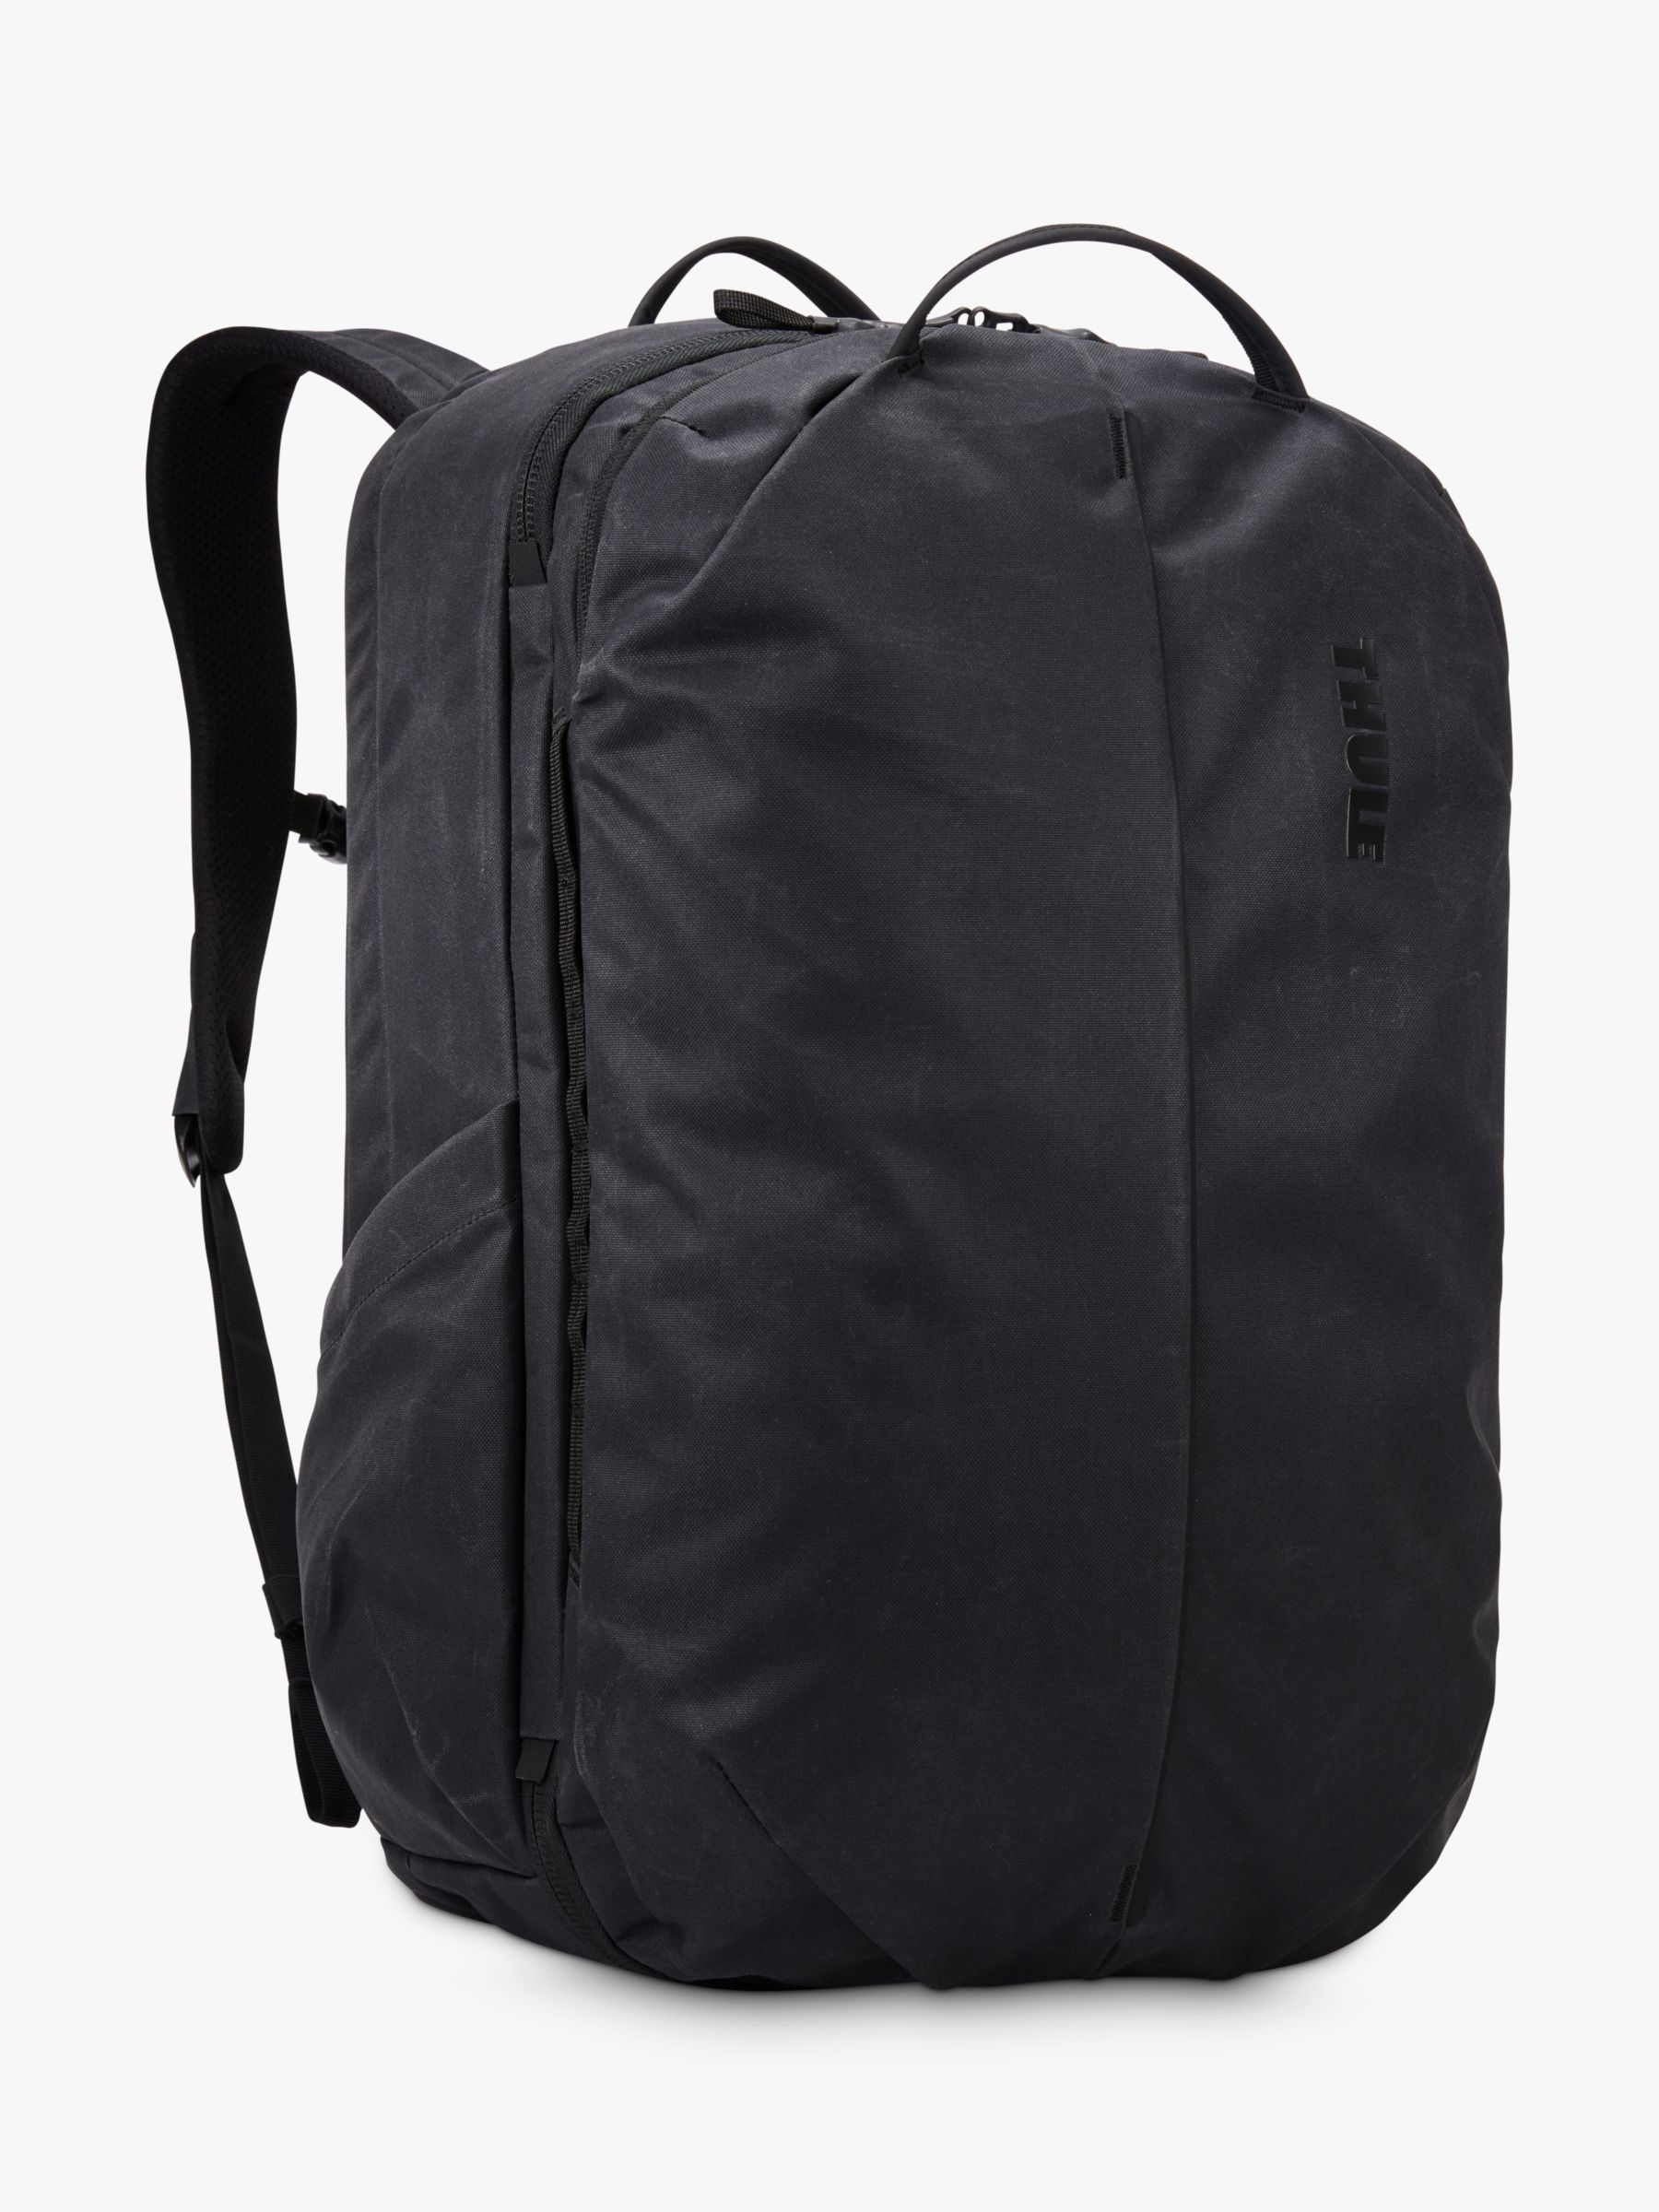 Thule Aion 40L Recycled Backpack, Black at John Lewis & Partners